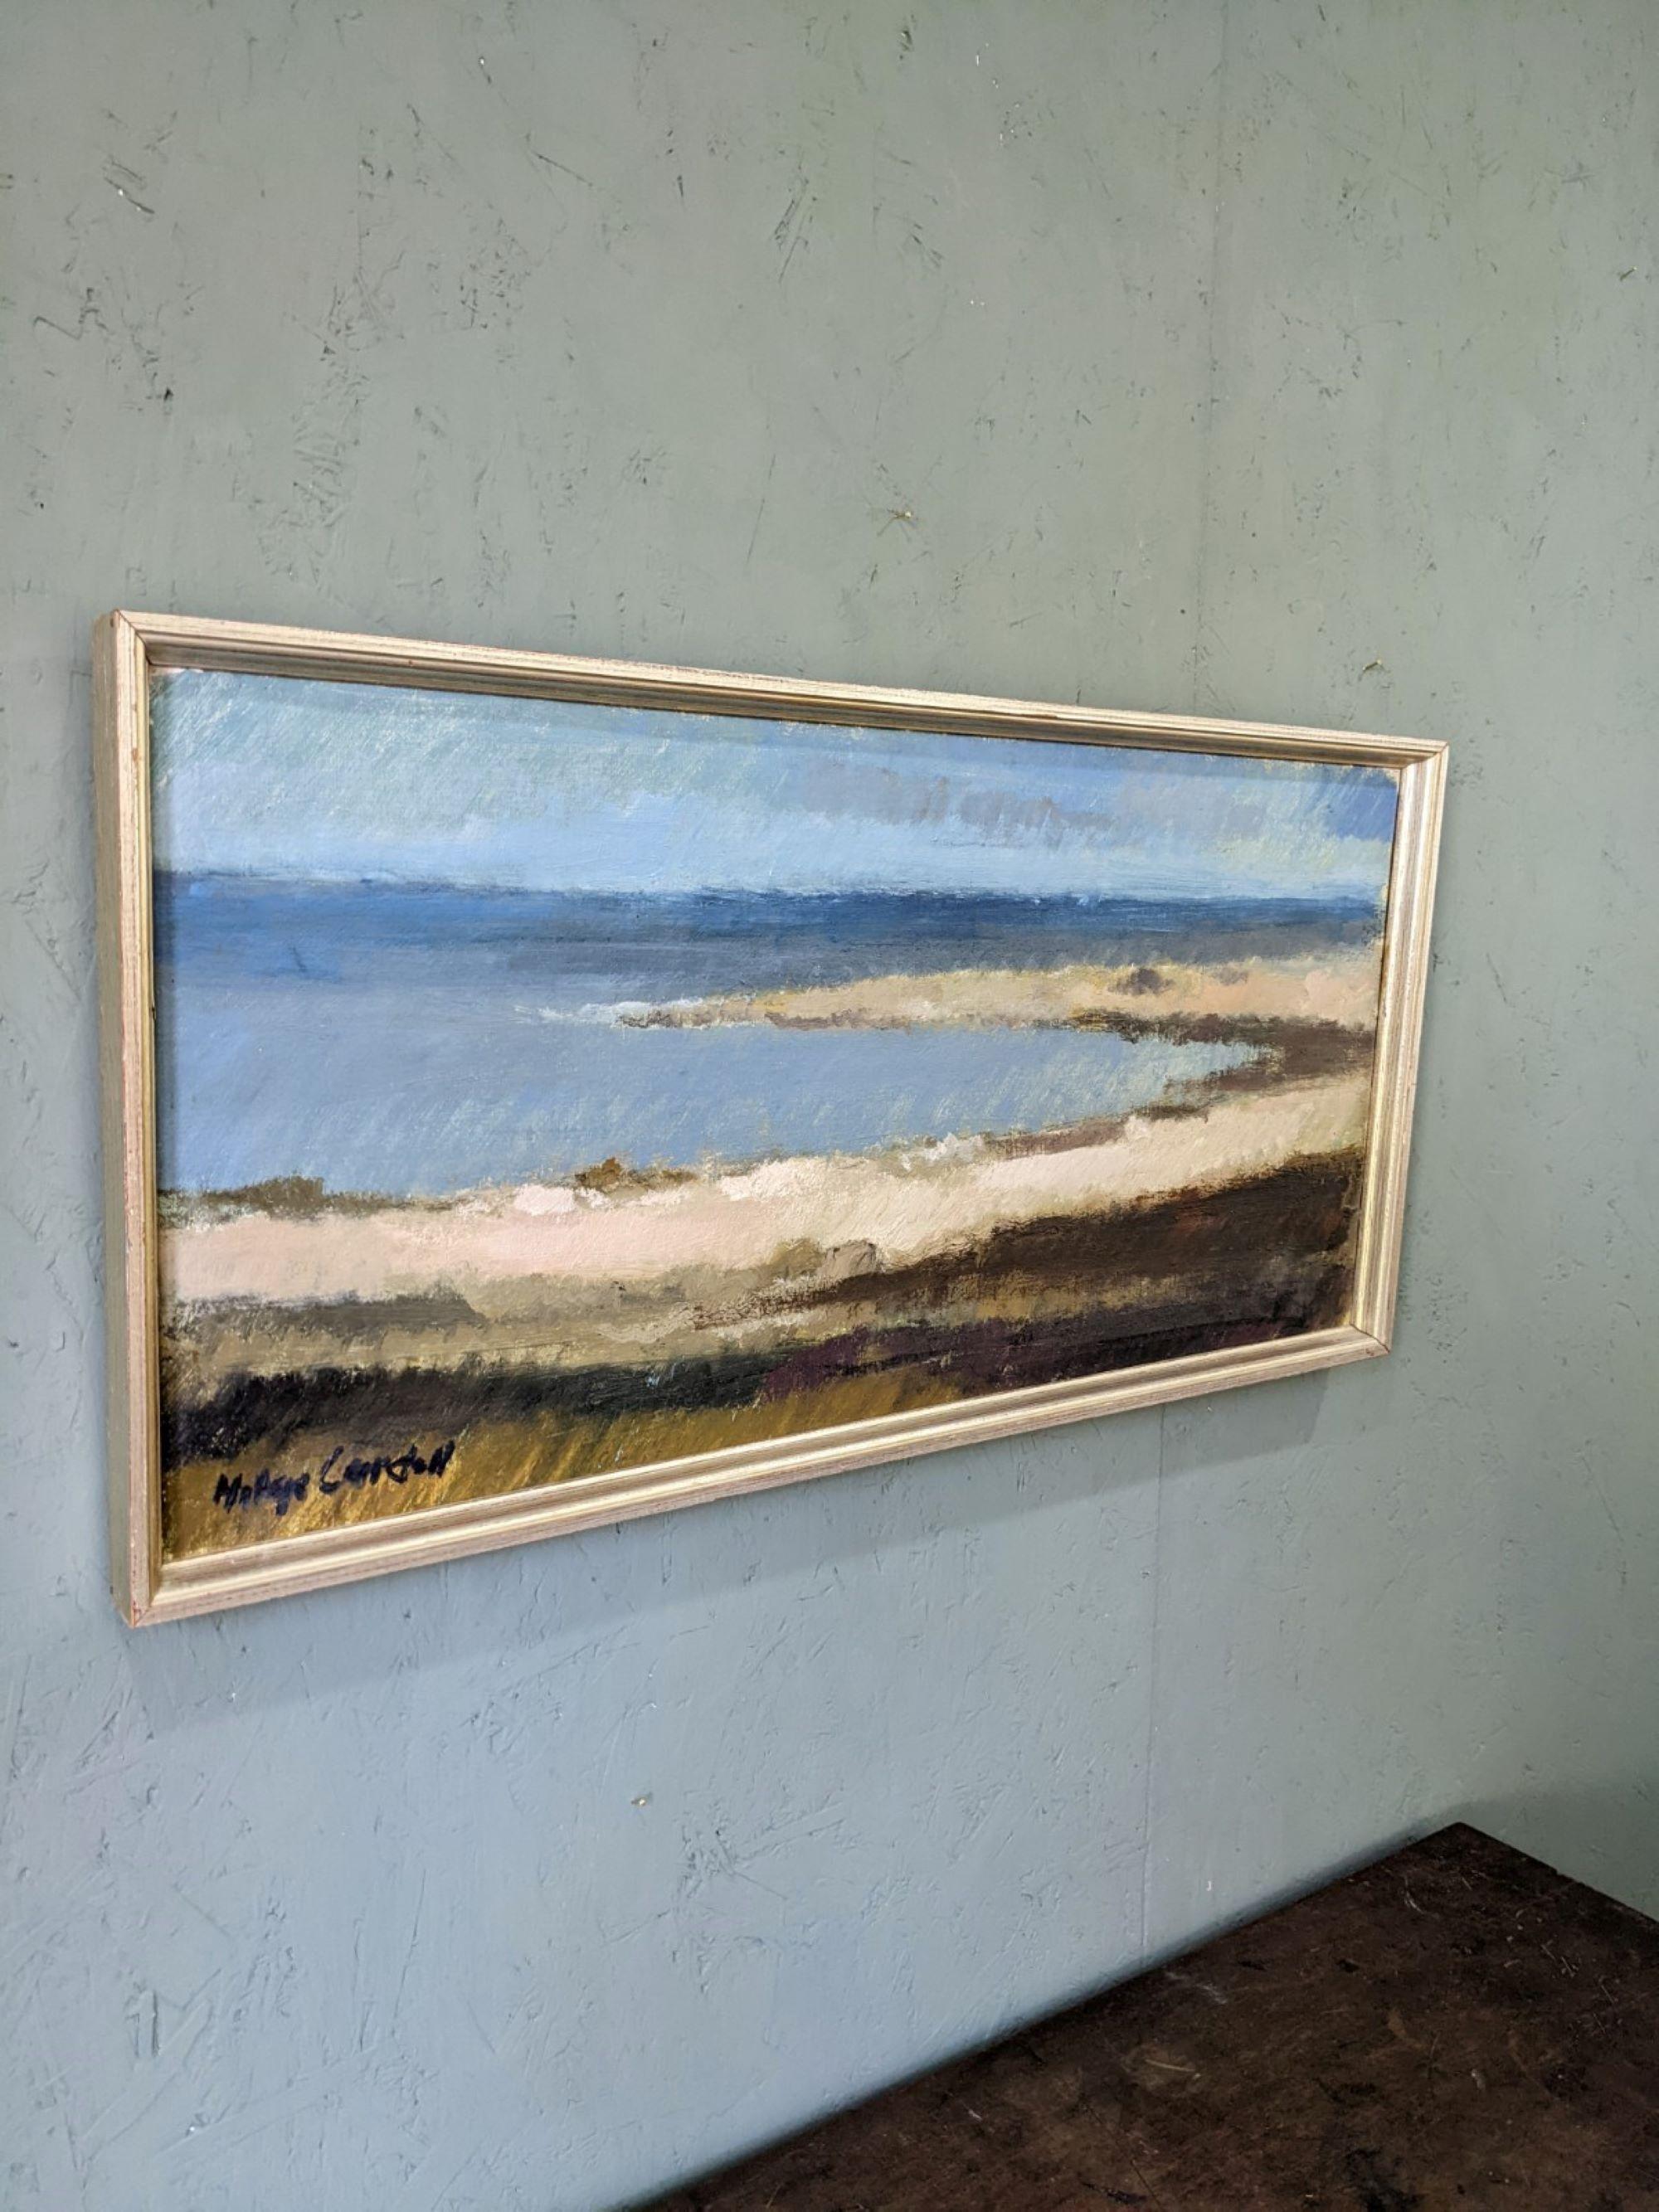 BLUE BREEZE
Size: 36 x 72cm (including frame)
Oil on canvas

A restful and atmospheric mid-century modernist coastal scape painting, executed in oil onto canvas.

Simple yet effective in its composition, this scenic work of art presents a panoramic